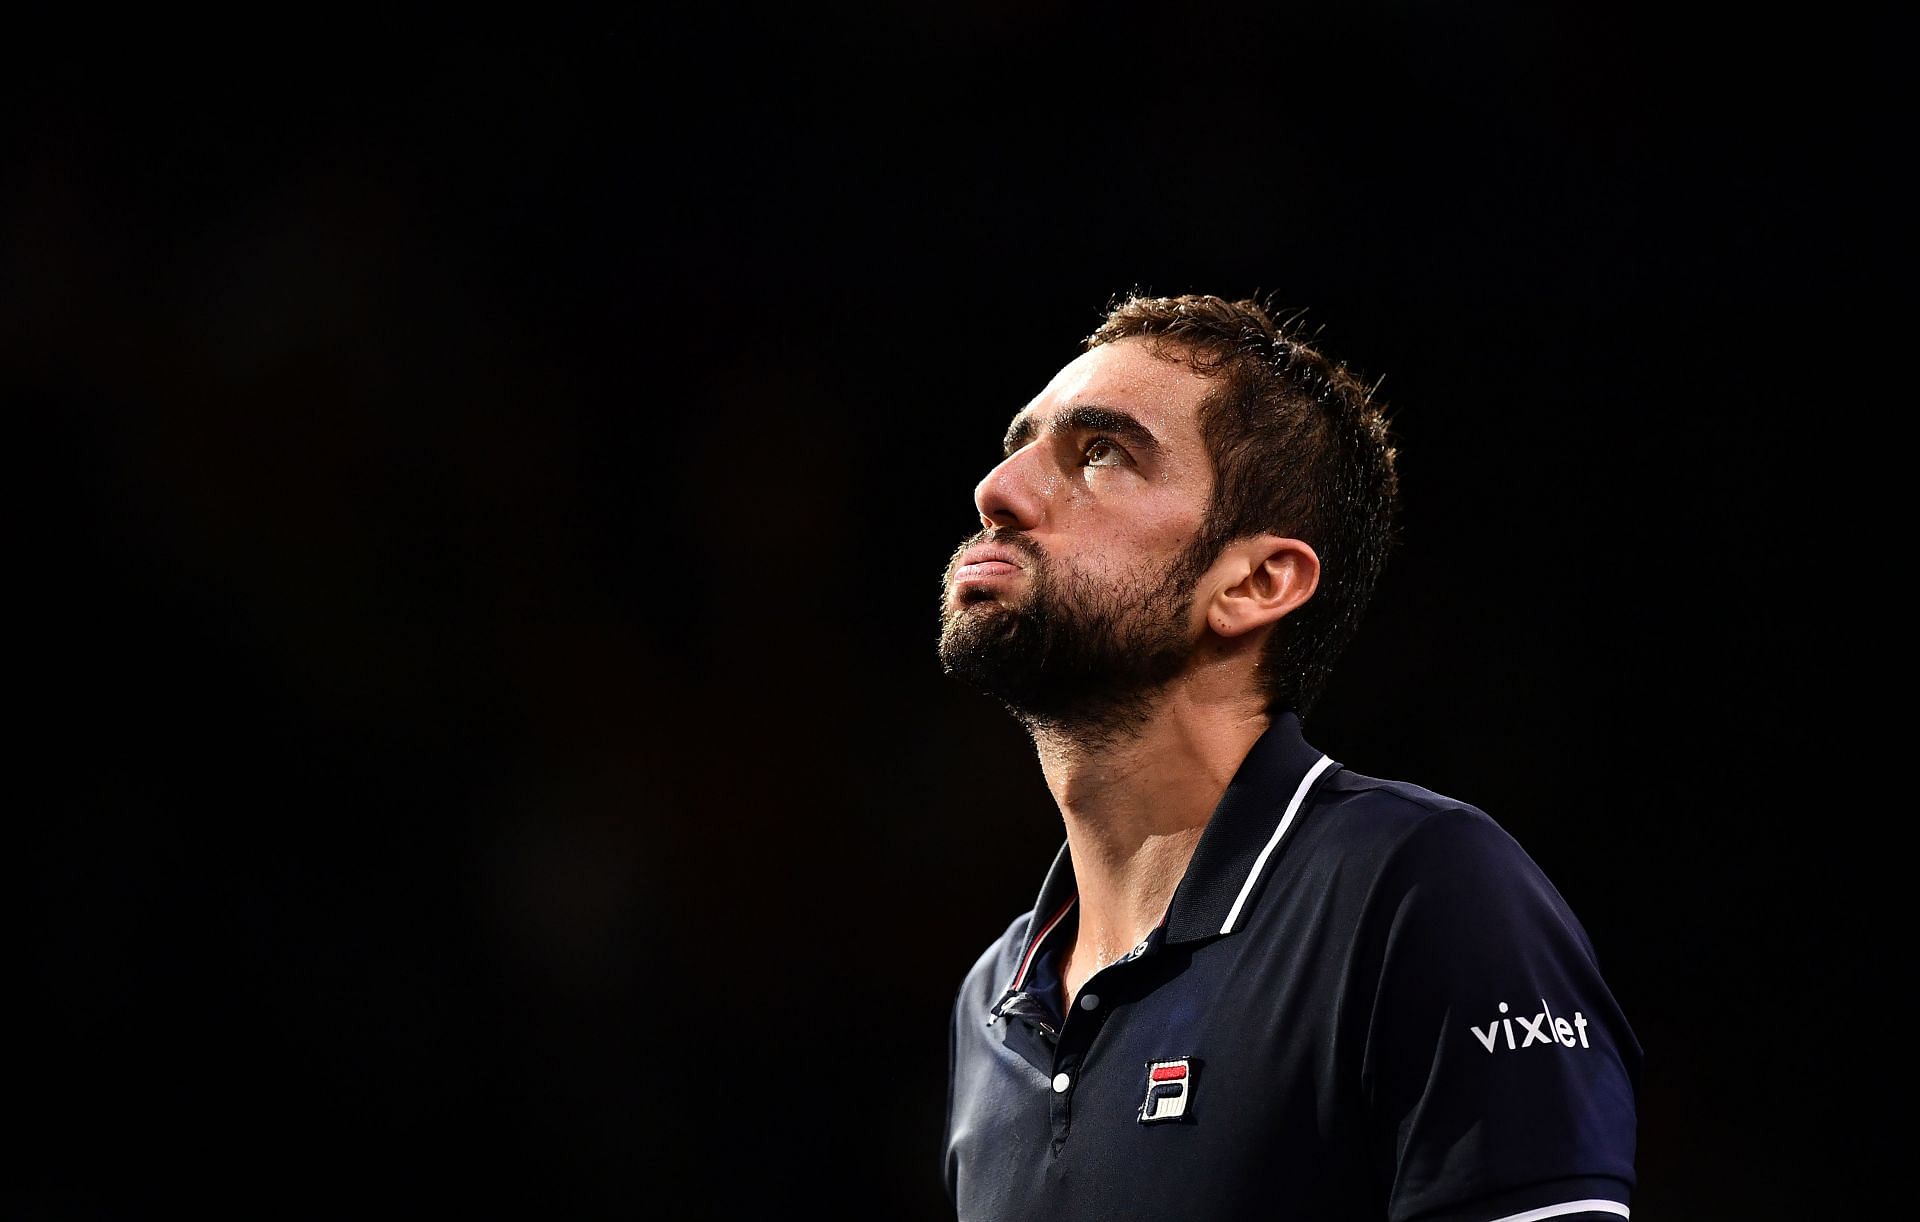 Marin  Cilic&#039;s serve will be key for the contest.